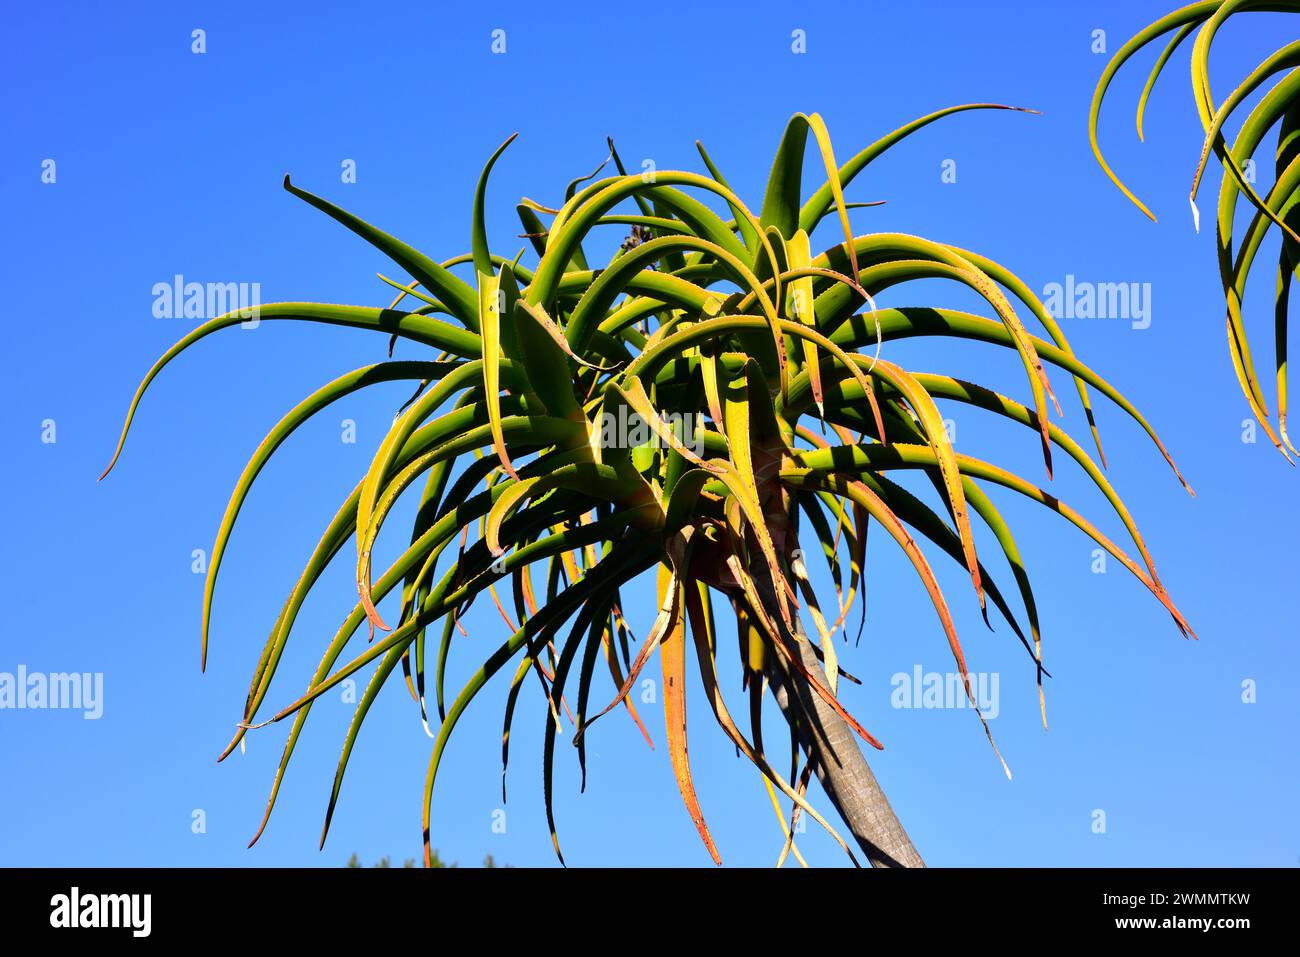 Tree aloe (Aloe barberae or Aloidendron barberae) is a succulent arborescent plant native to southern Africa. Stock Photo